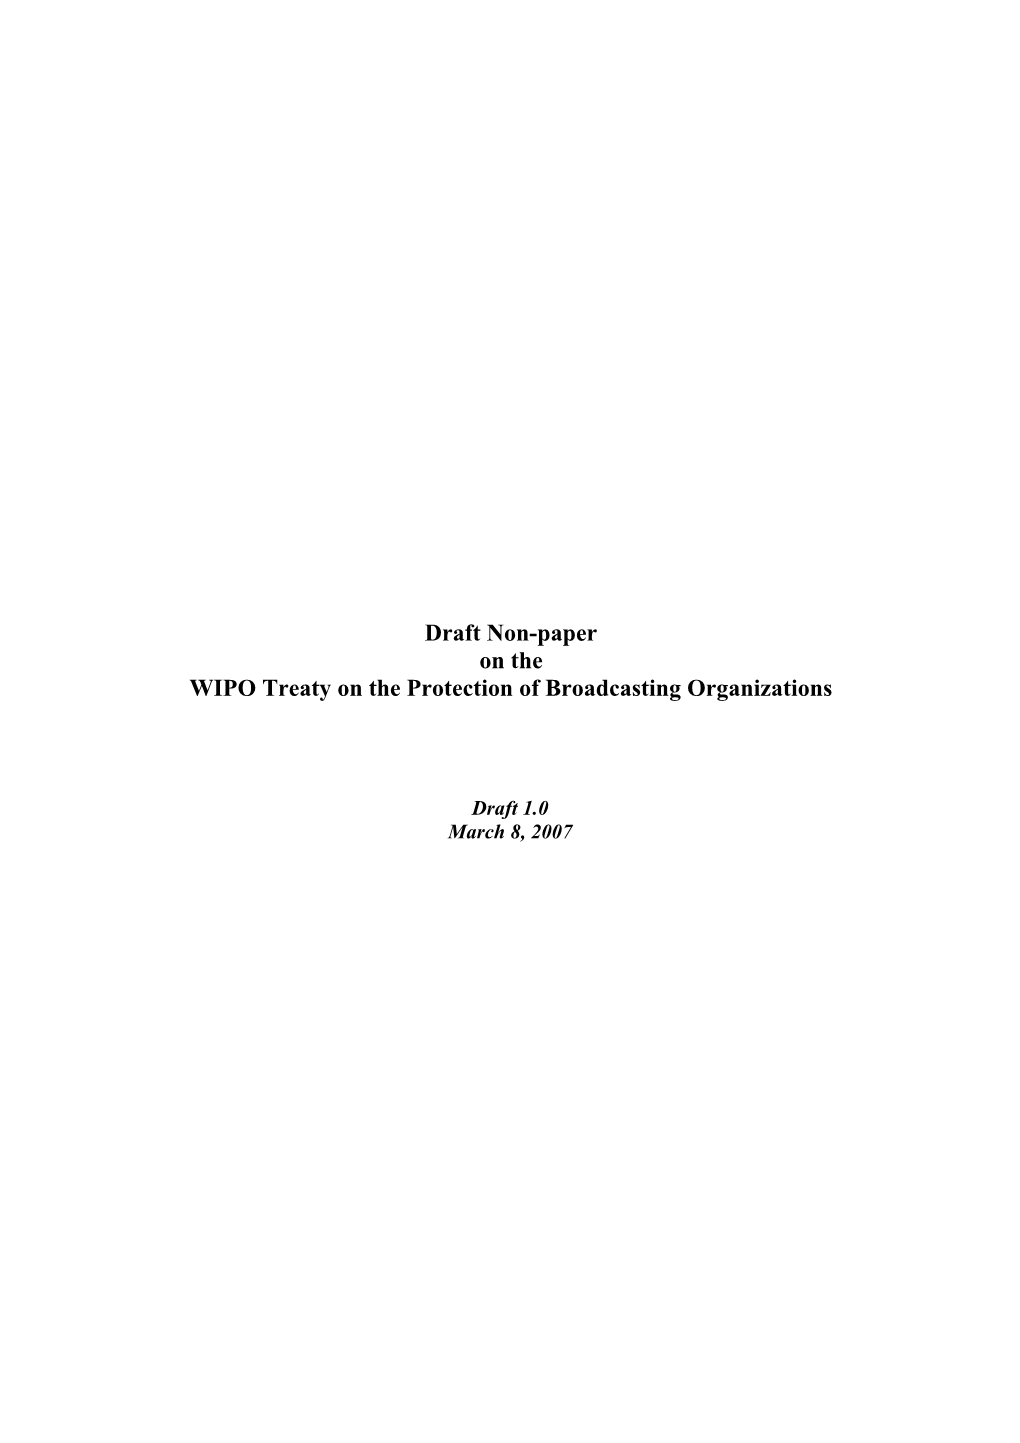 SCCR/S1/WWW 75352 : Draft Non-Paper on the WIPO Treaty on the Protection of Broadcasting